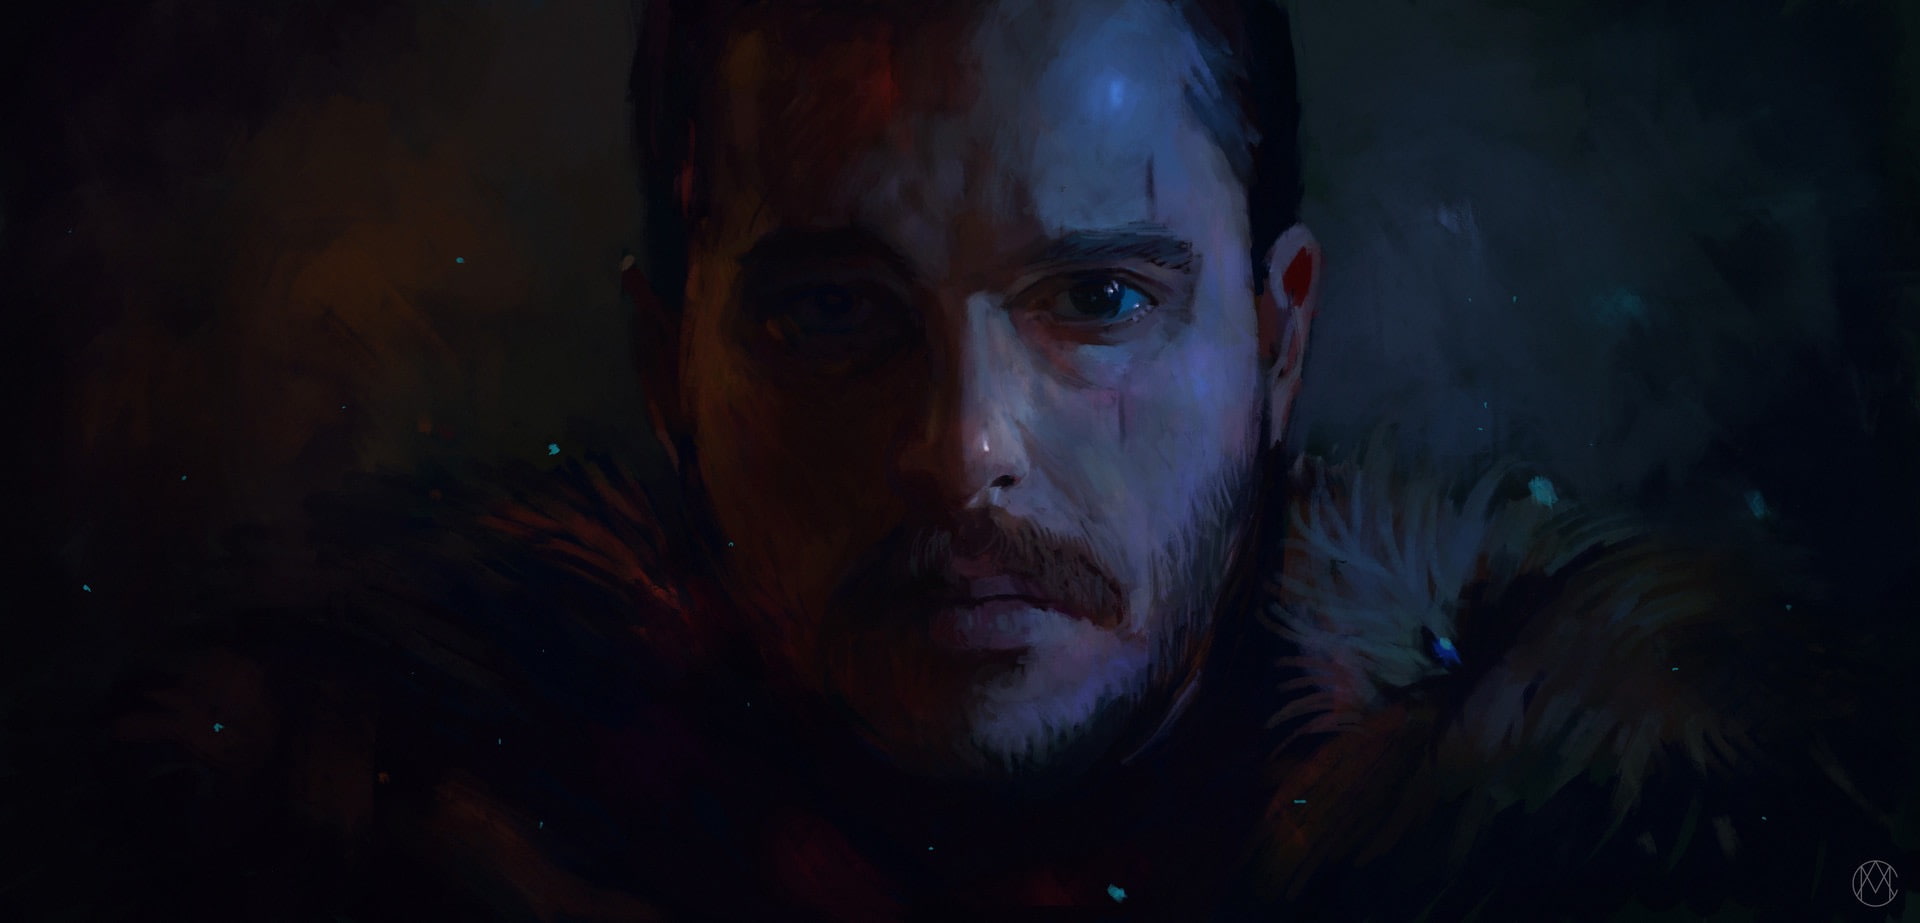 A Song Of Ice And Fire, Aegon Targaryen, Game Of Thrones, Jon Snow